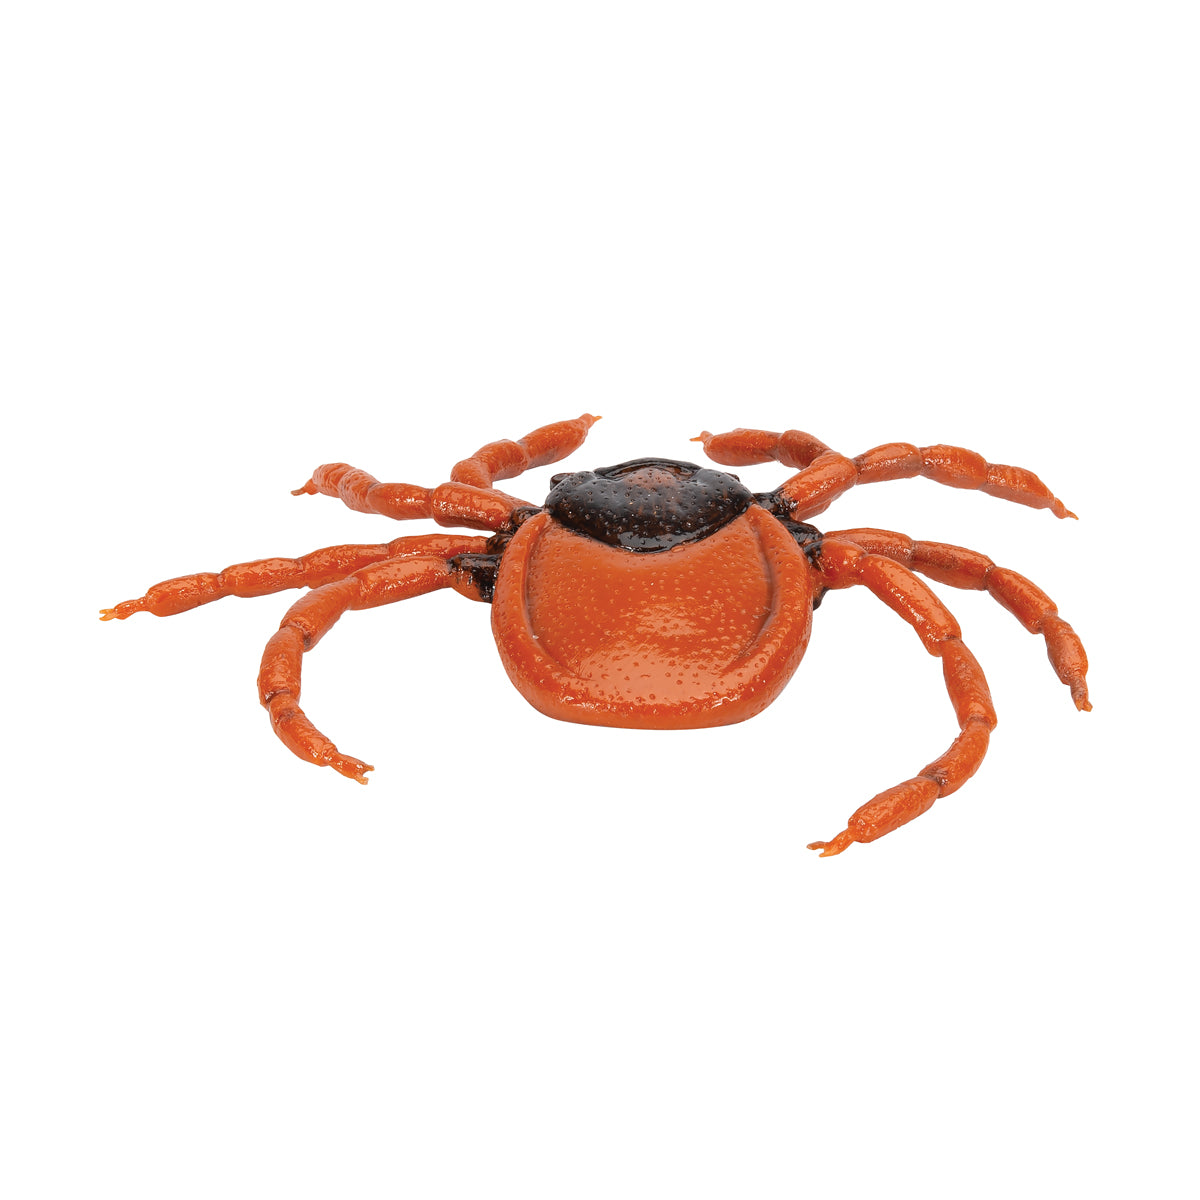 Model of a tick (Ixodes ricinus) which has been enlarged